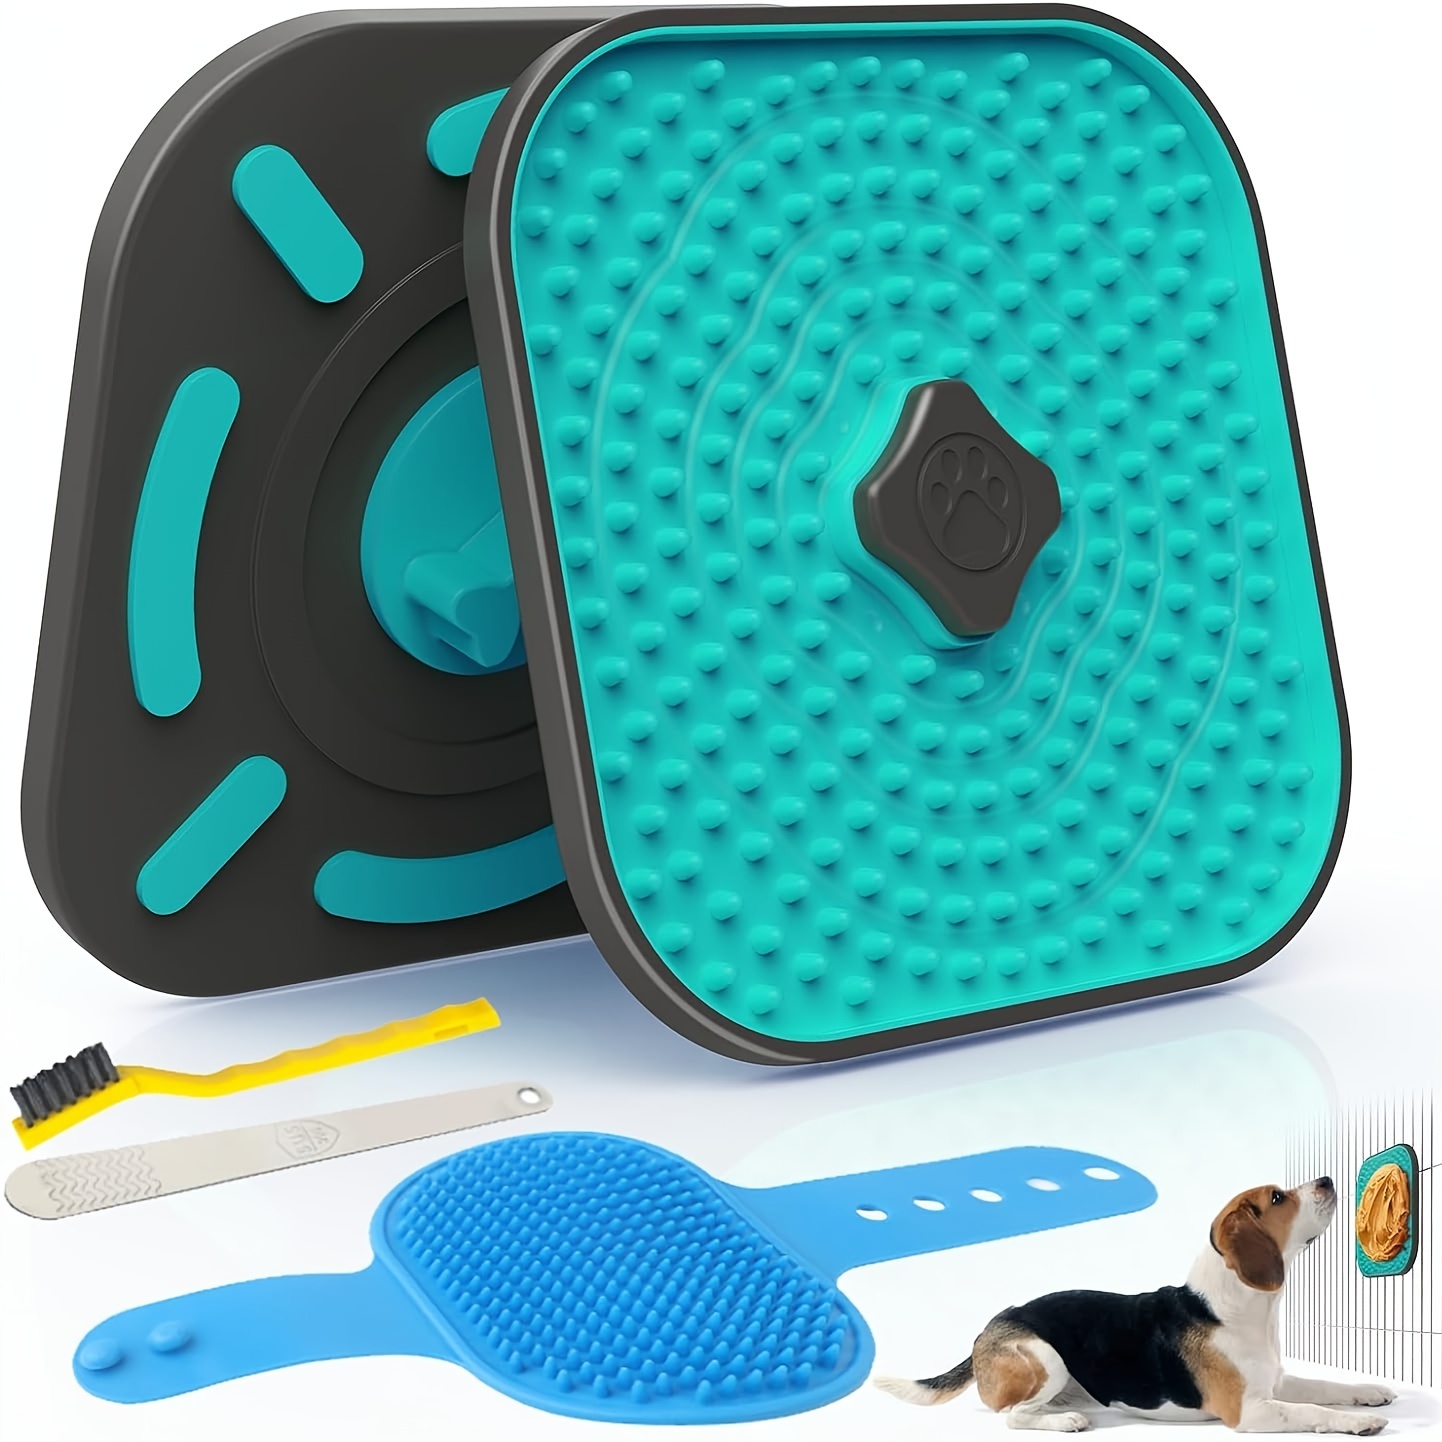  Lick Mat for Dogs Crate Training Aids for Puppies to